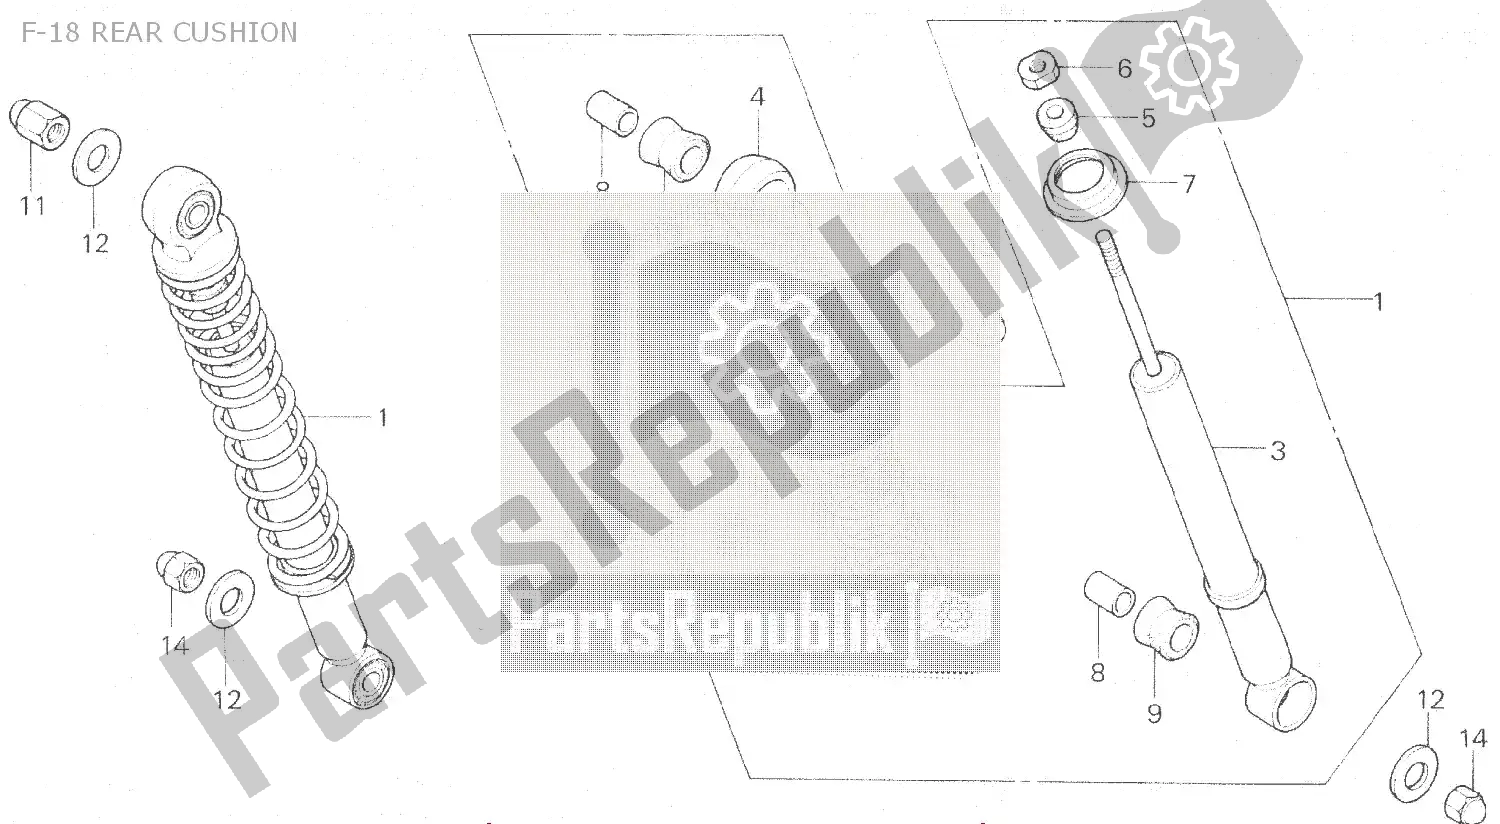 All parts for the F-18 Rear Cushion of the Honda MB 100 1980